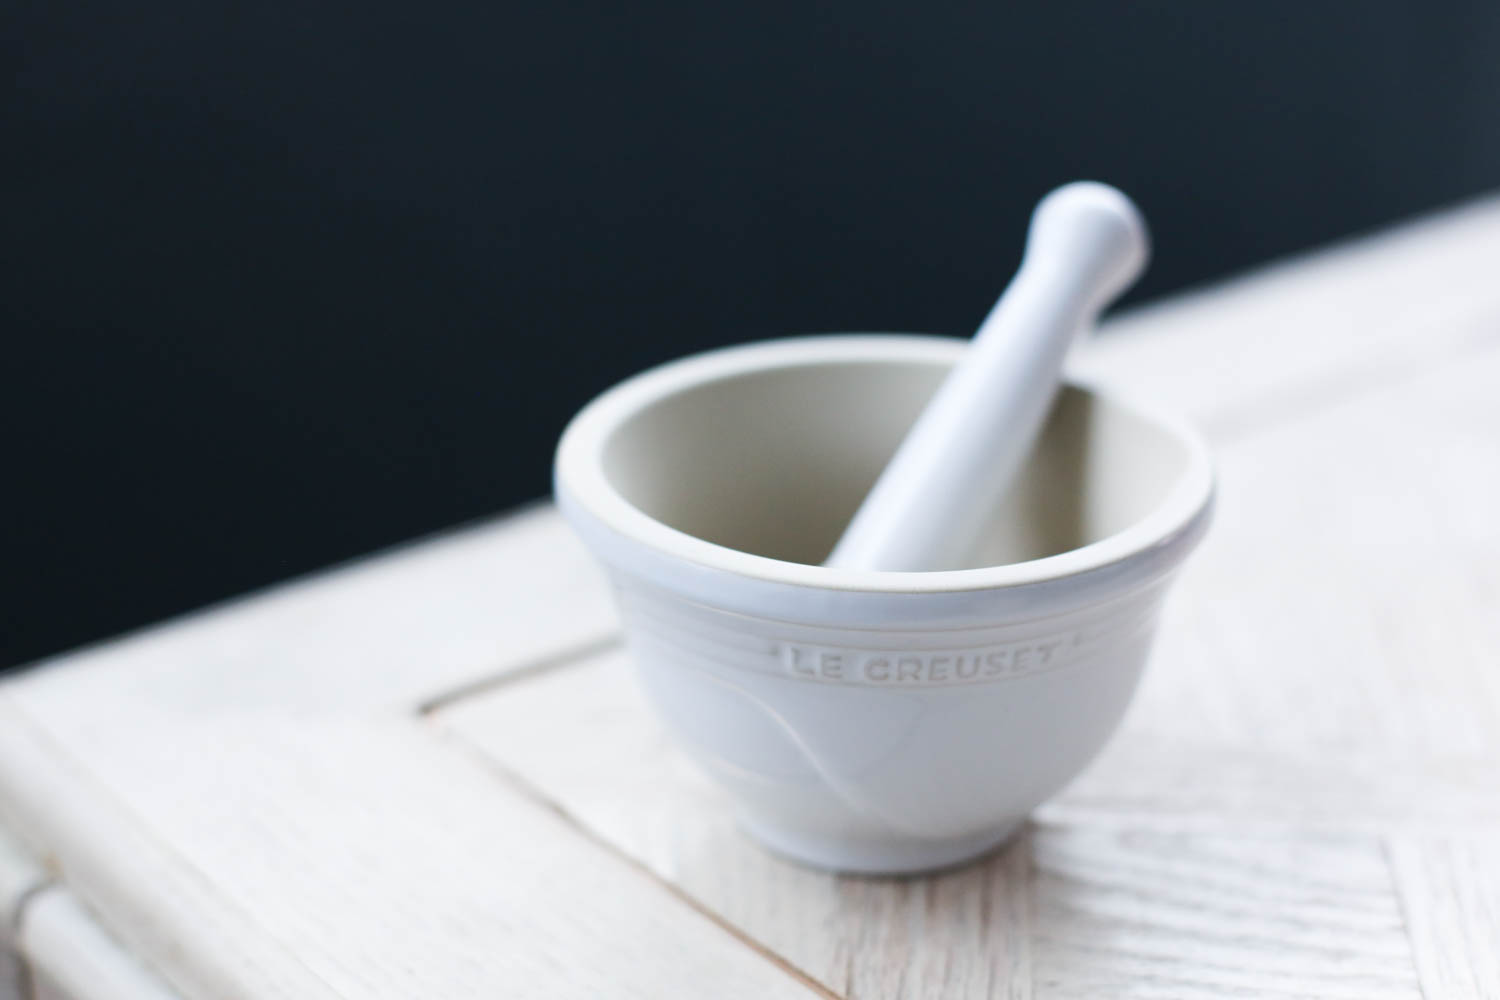 Cutest little Le Creuset mortar and pestle. I bought mine from The Bay. It's also available at Amazon.